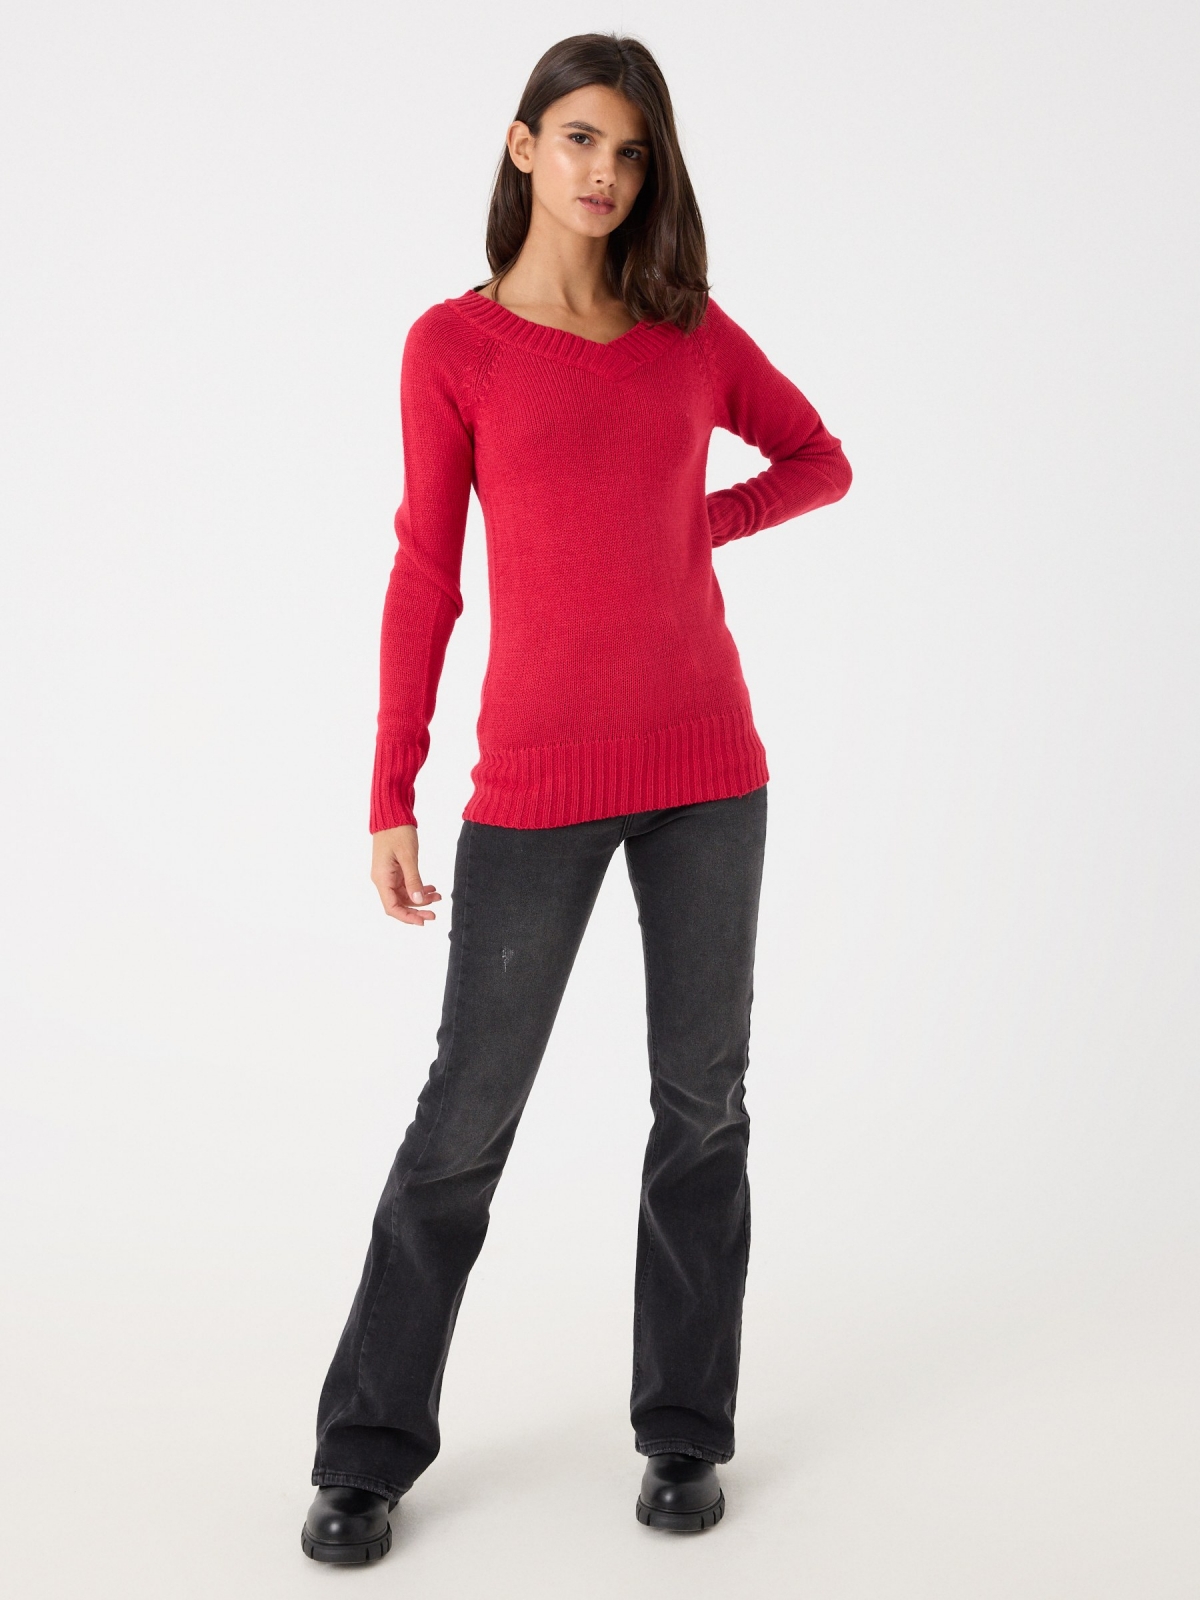 V-neck knit sweater red front view